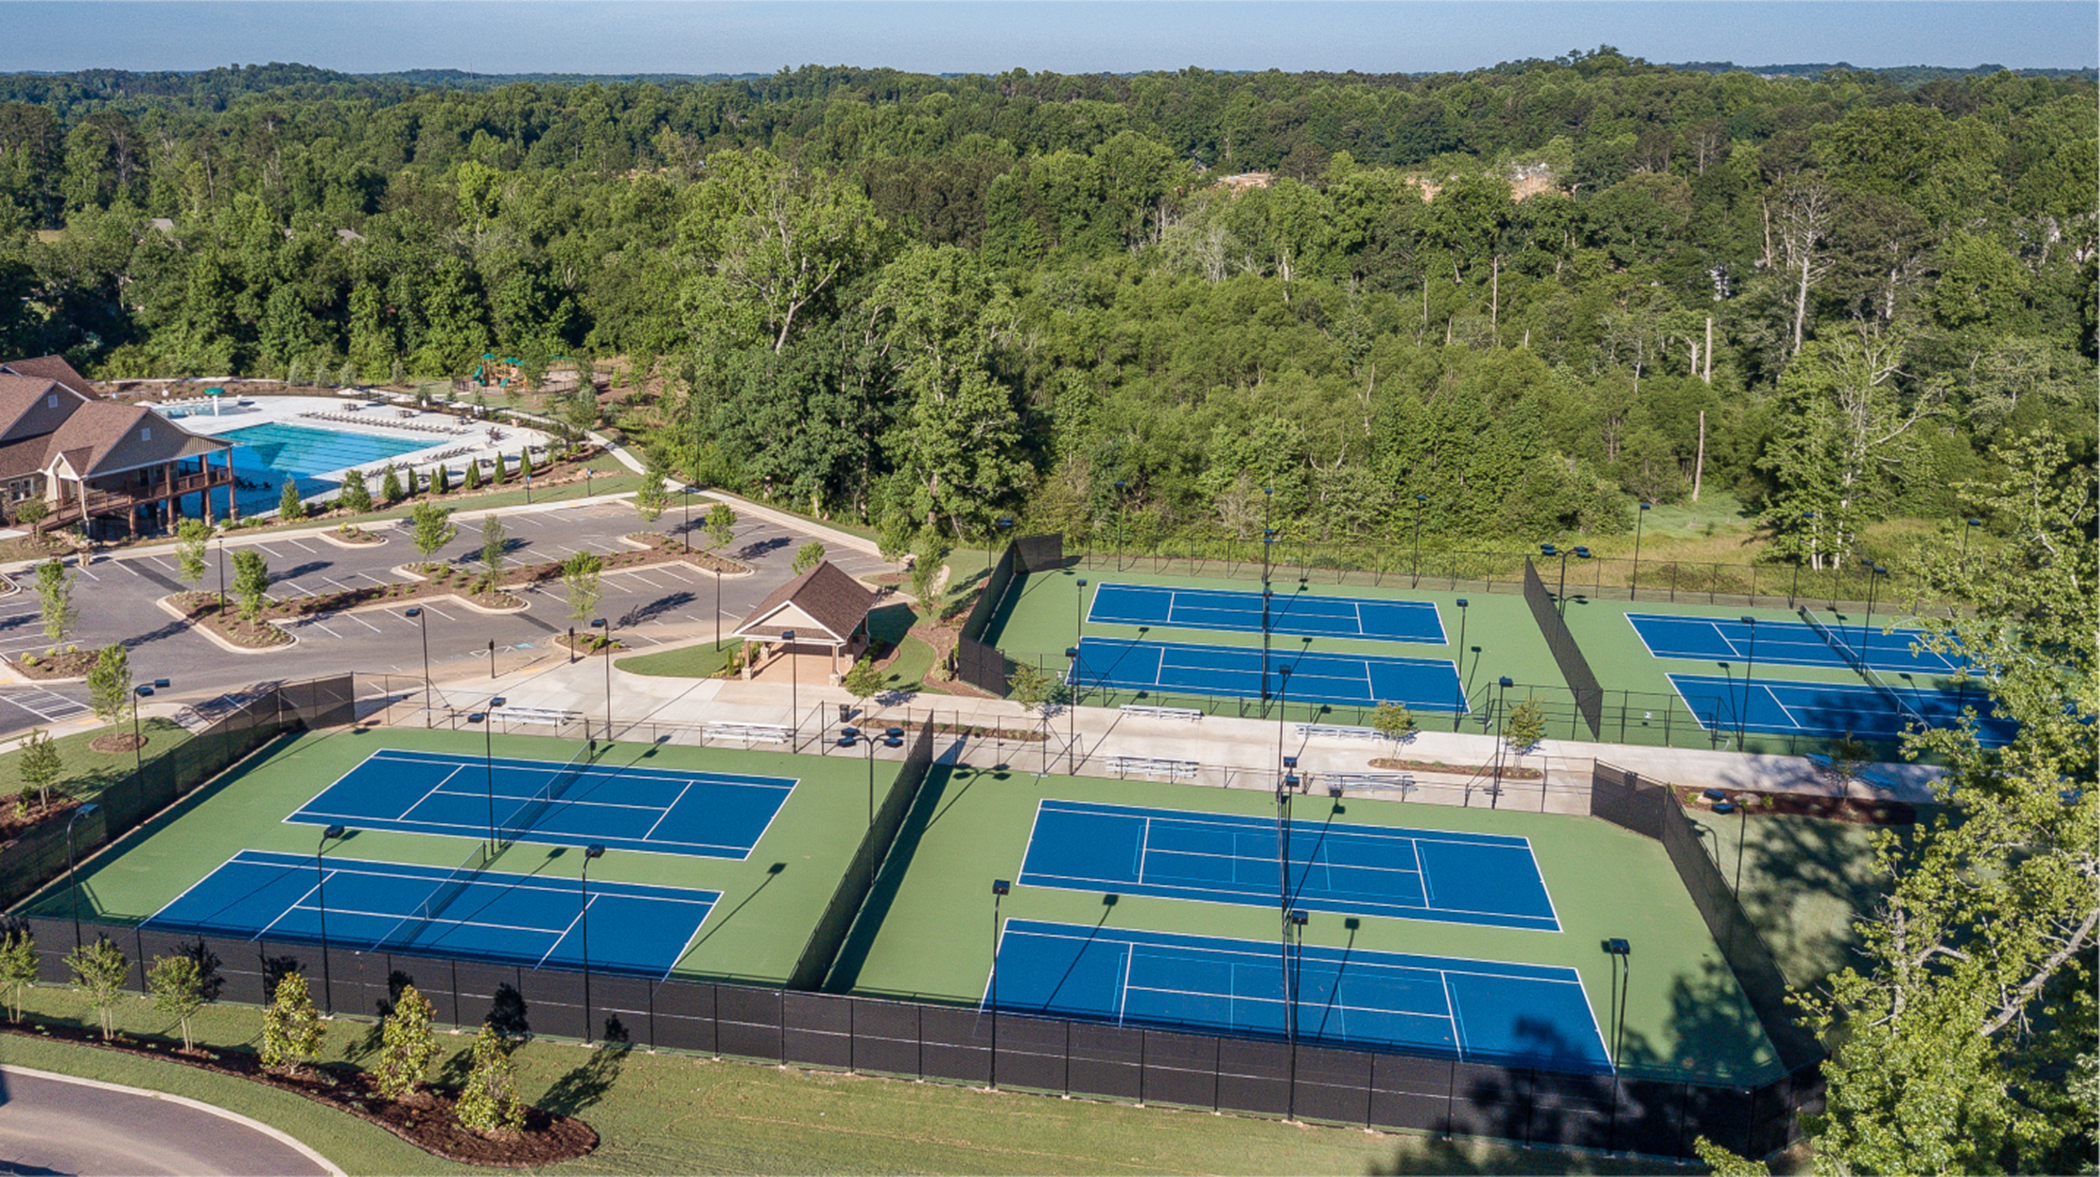 Community tennis courts and pool